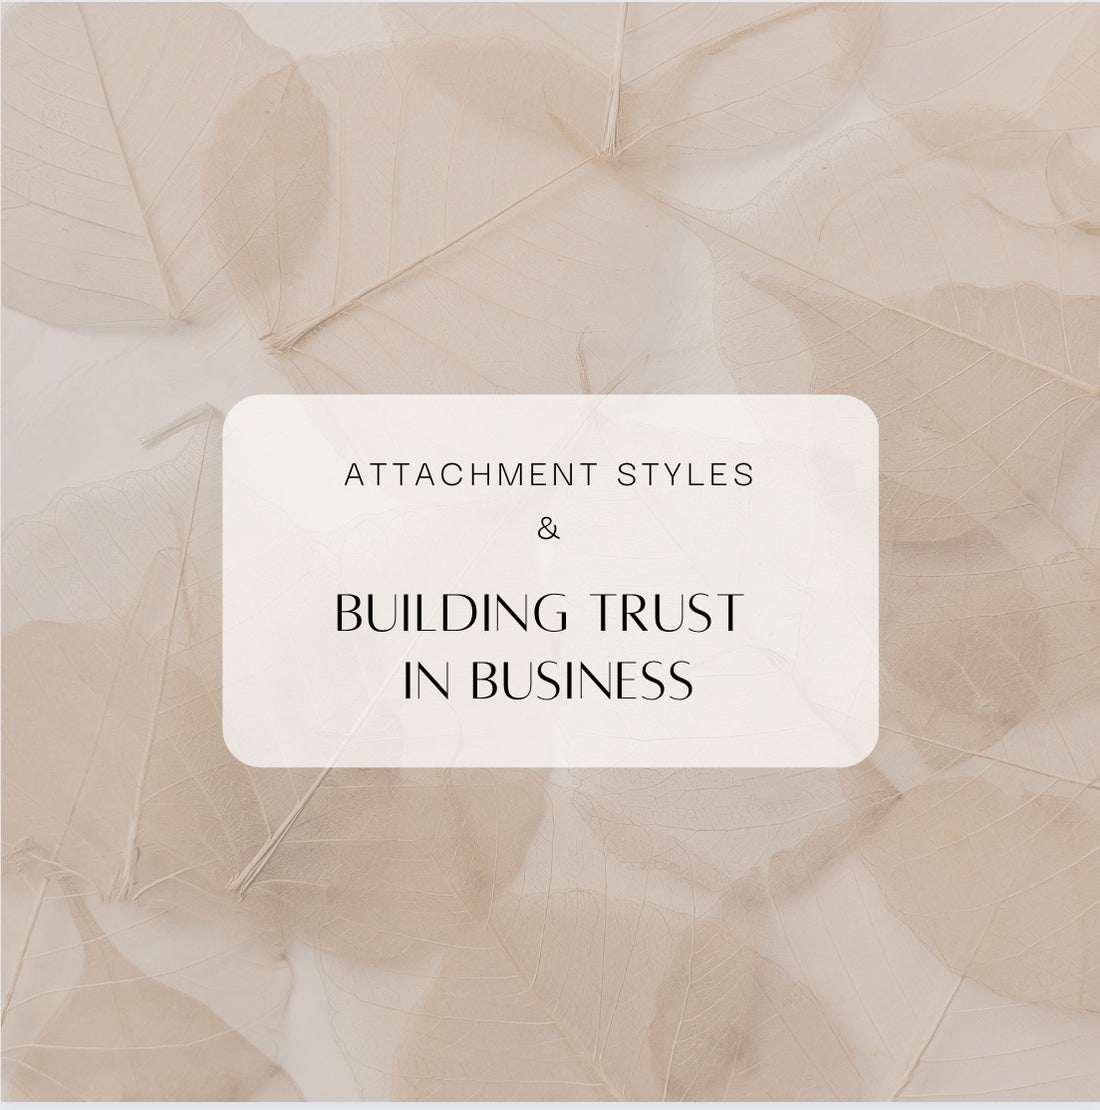 Attachment Styles & Building Trust In Business